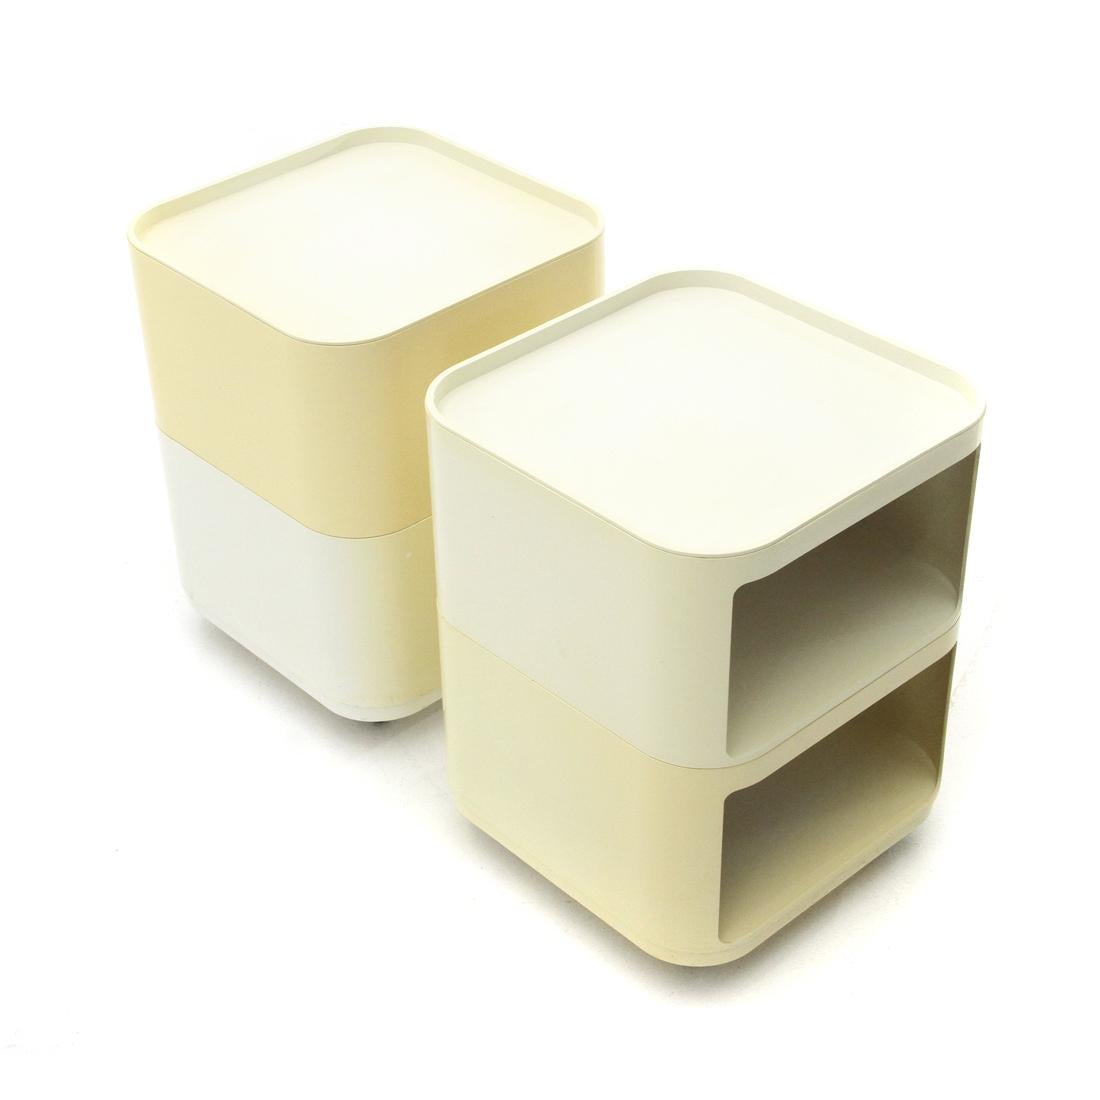 Pair of Square Componibili Containers by Anna Castelli Ferrieri for Kartell 1970 1